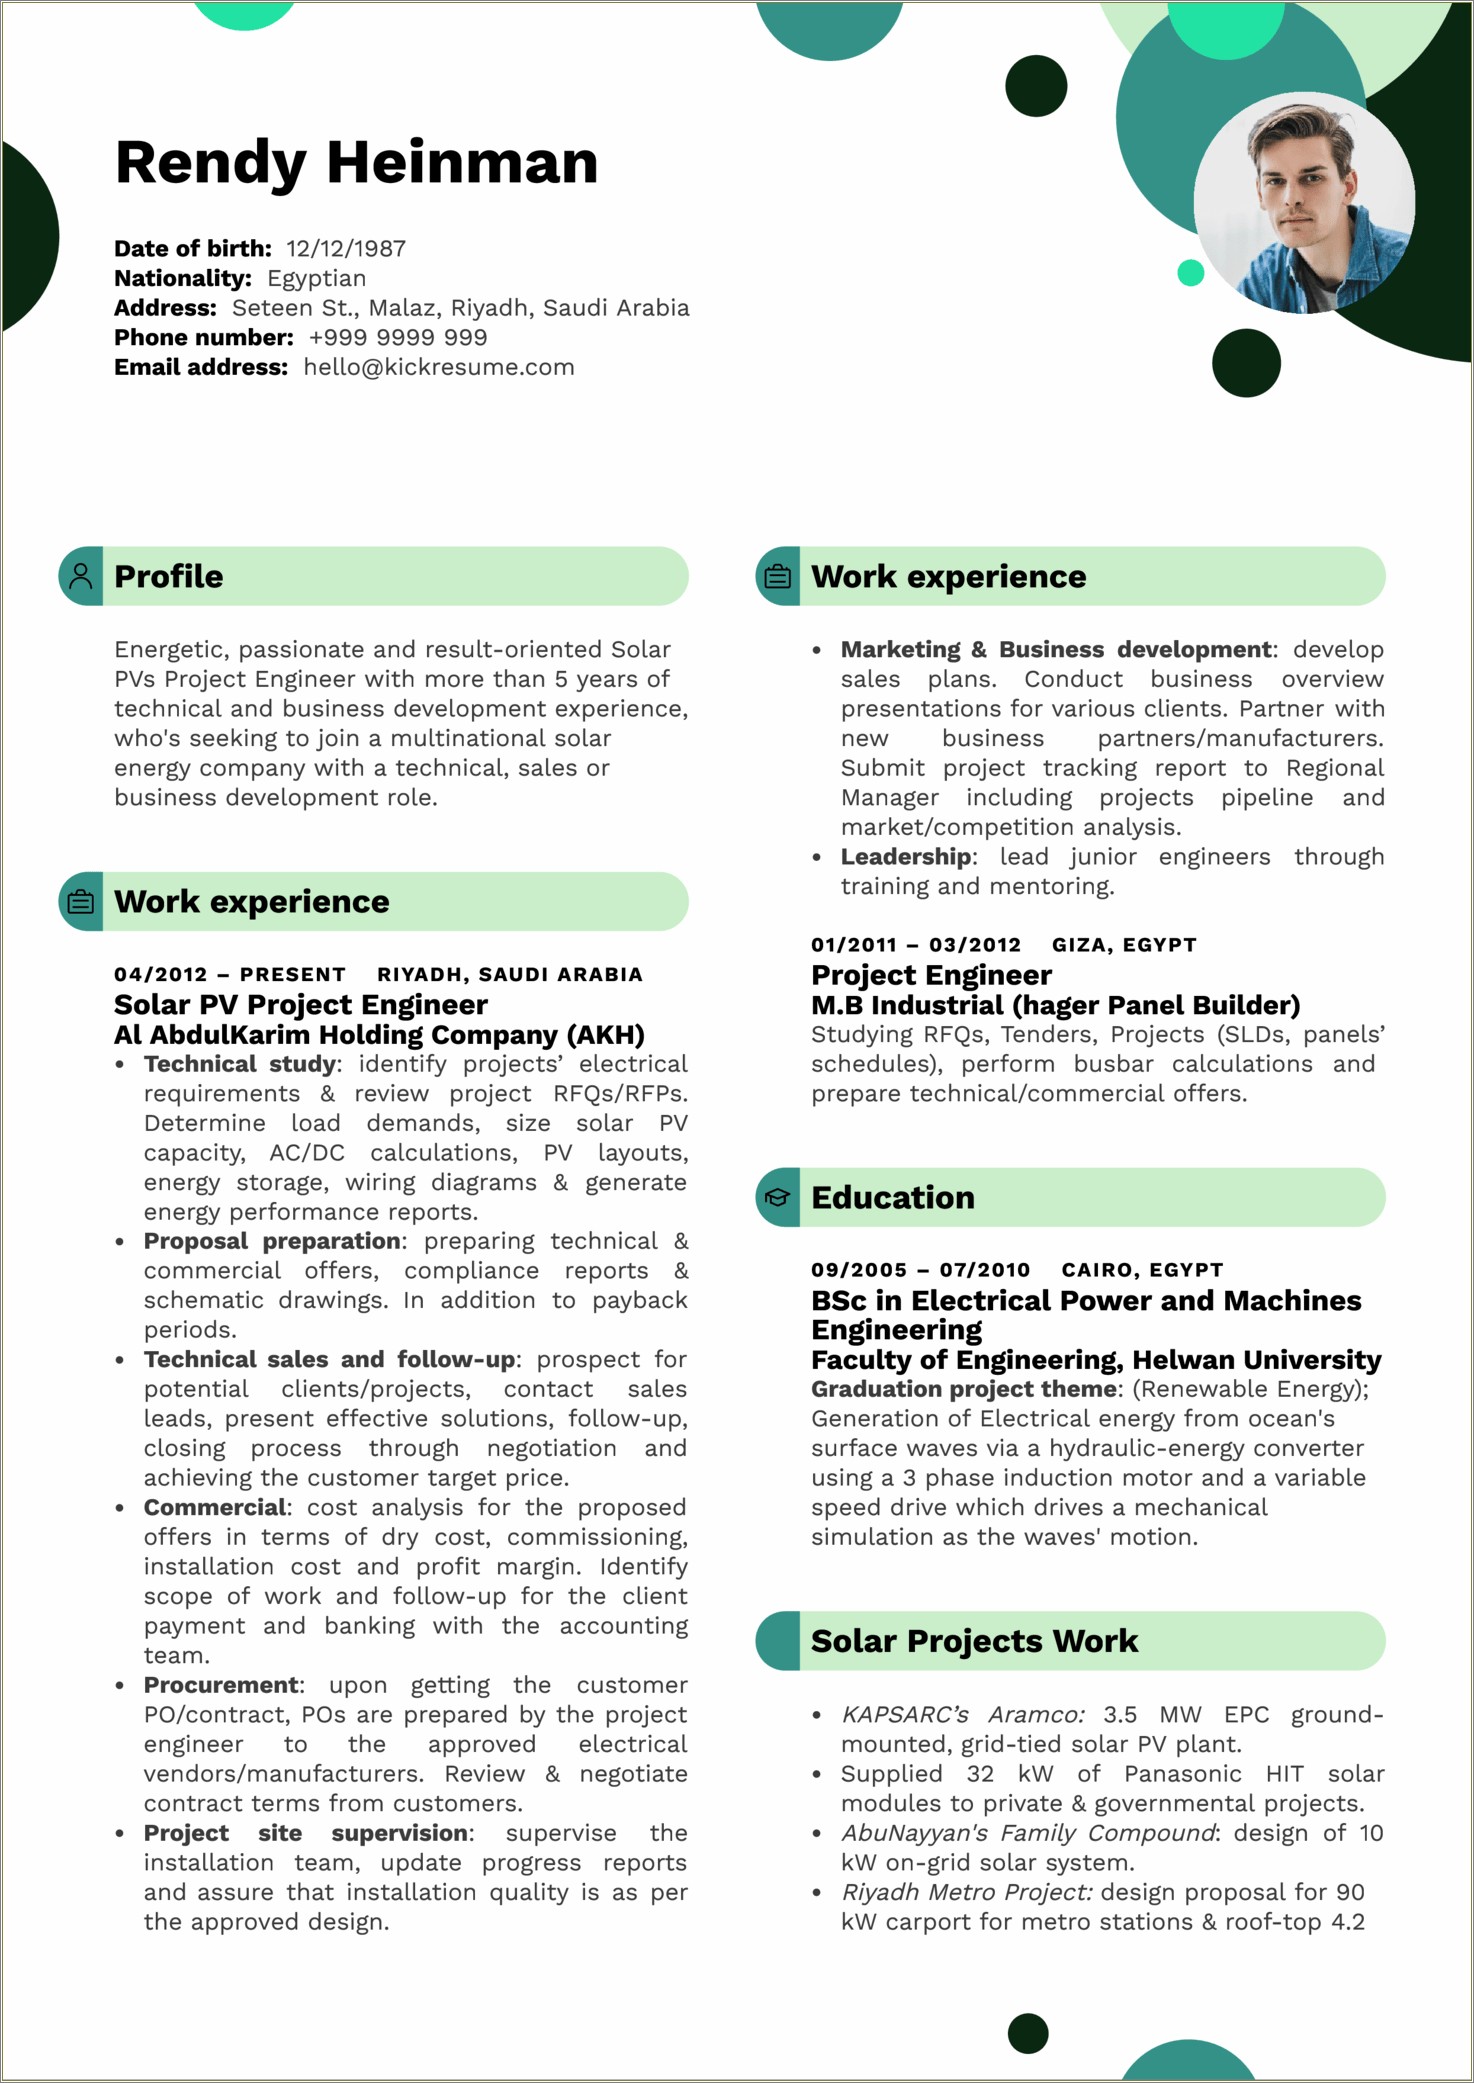 More Projects Or Work Experience In Resume